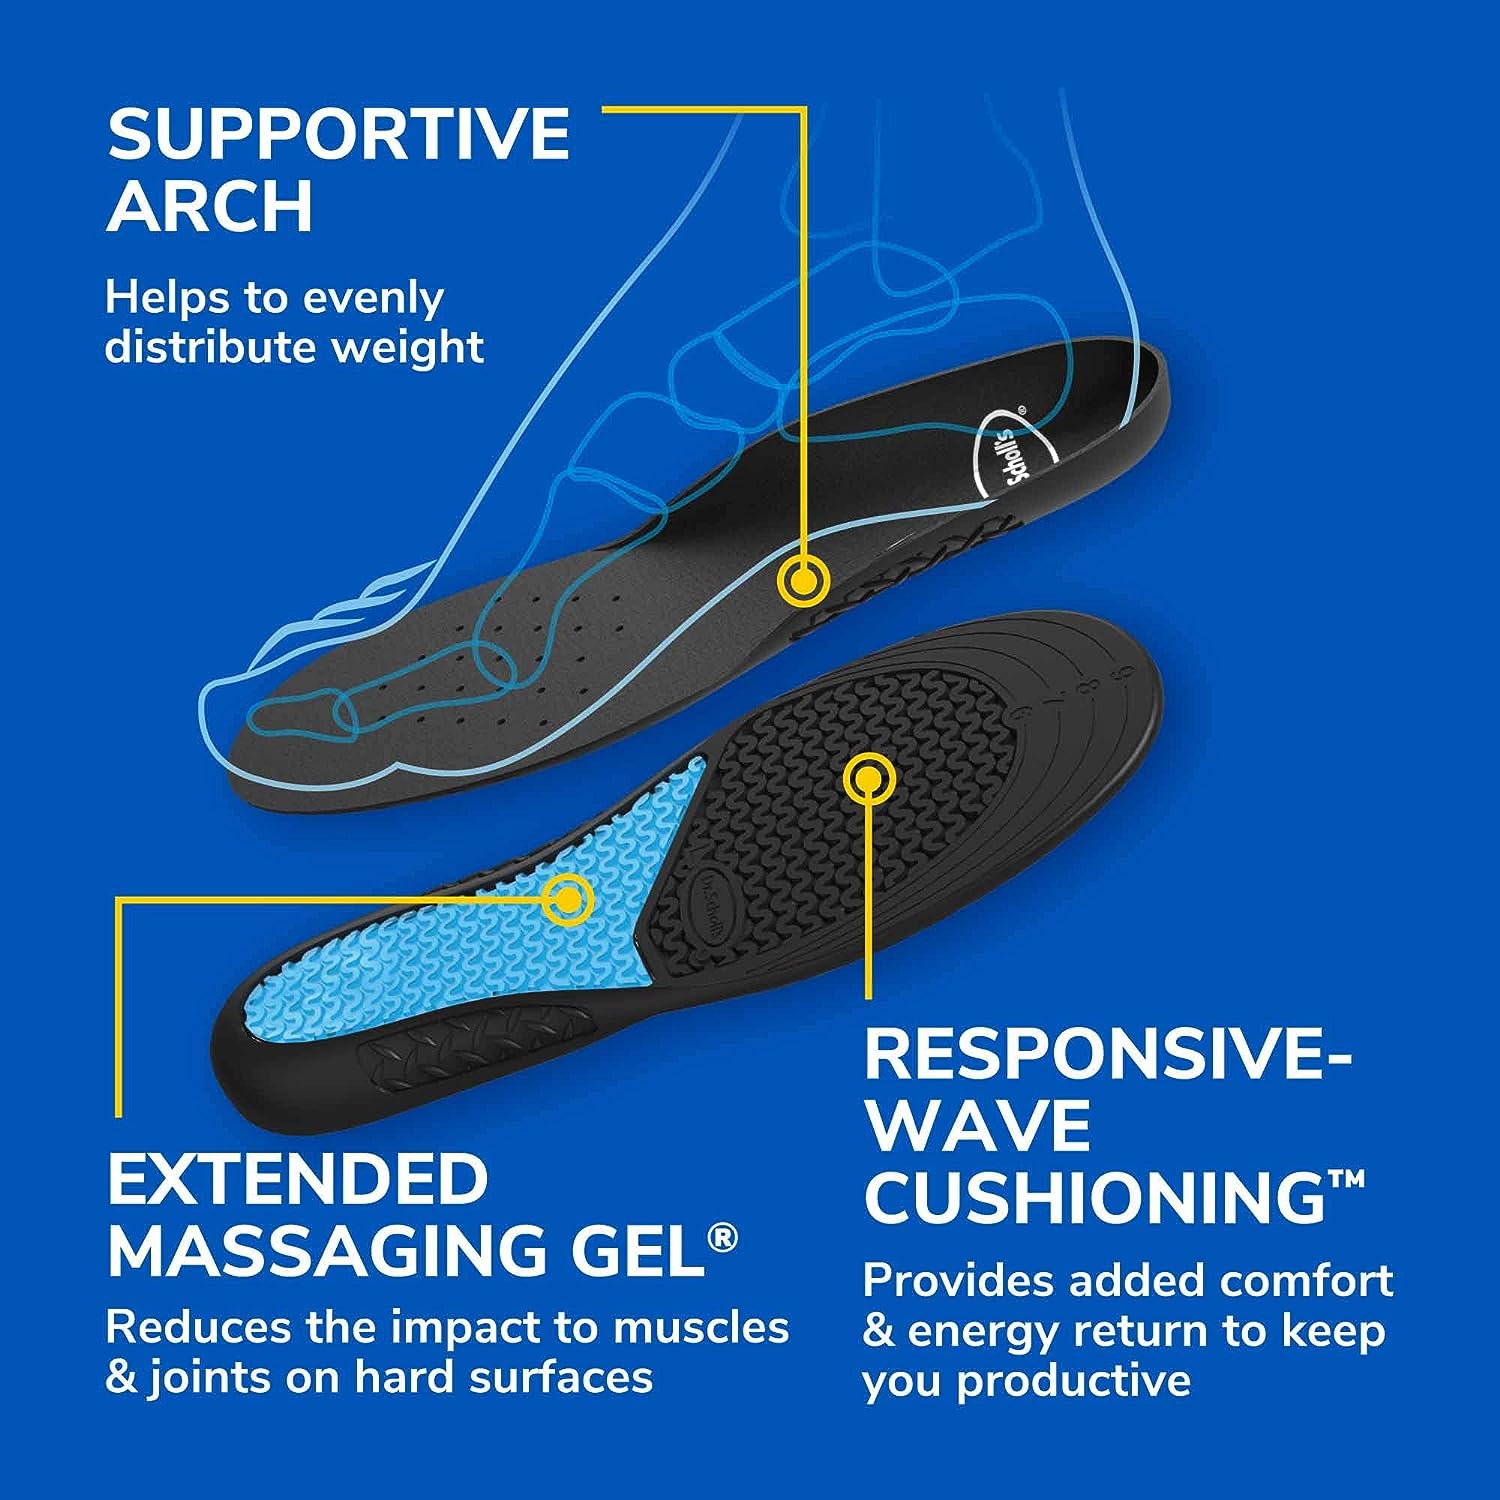 Dr. Scholls Work All-Day Superior Comfort Insoles with Massaging Gel®, On Feet All-Day, Shock Absorbing, Arch Support, Odor Control, Trim Inserts to Fit Work Boots and Shoes, Women Size 6-10, 1 Pair